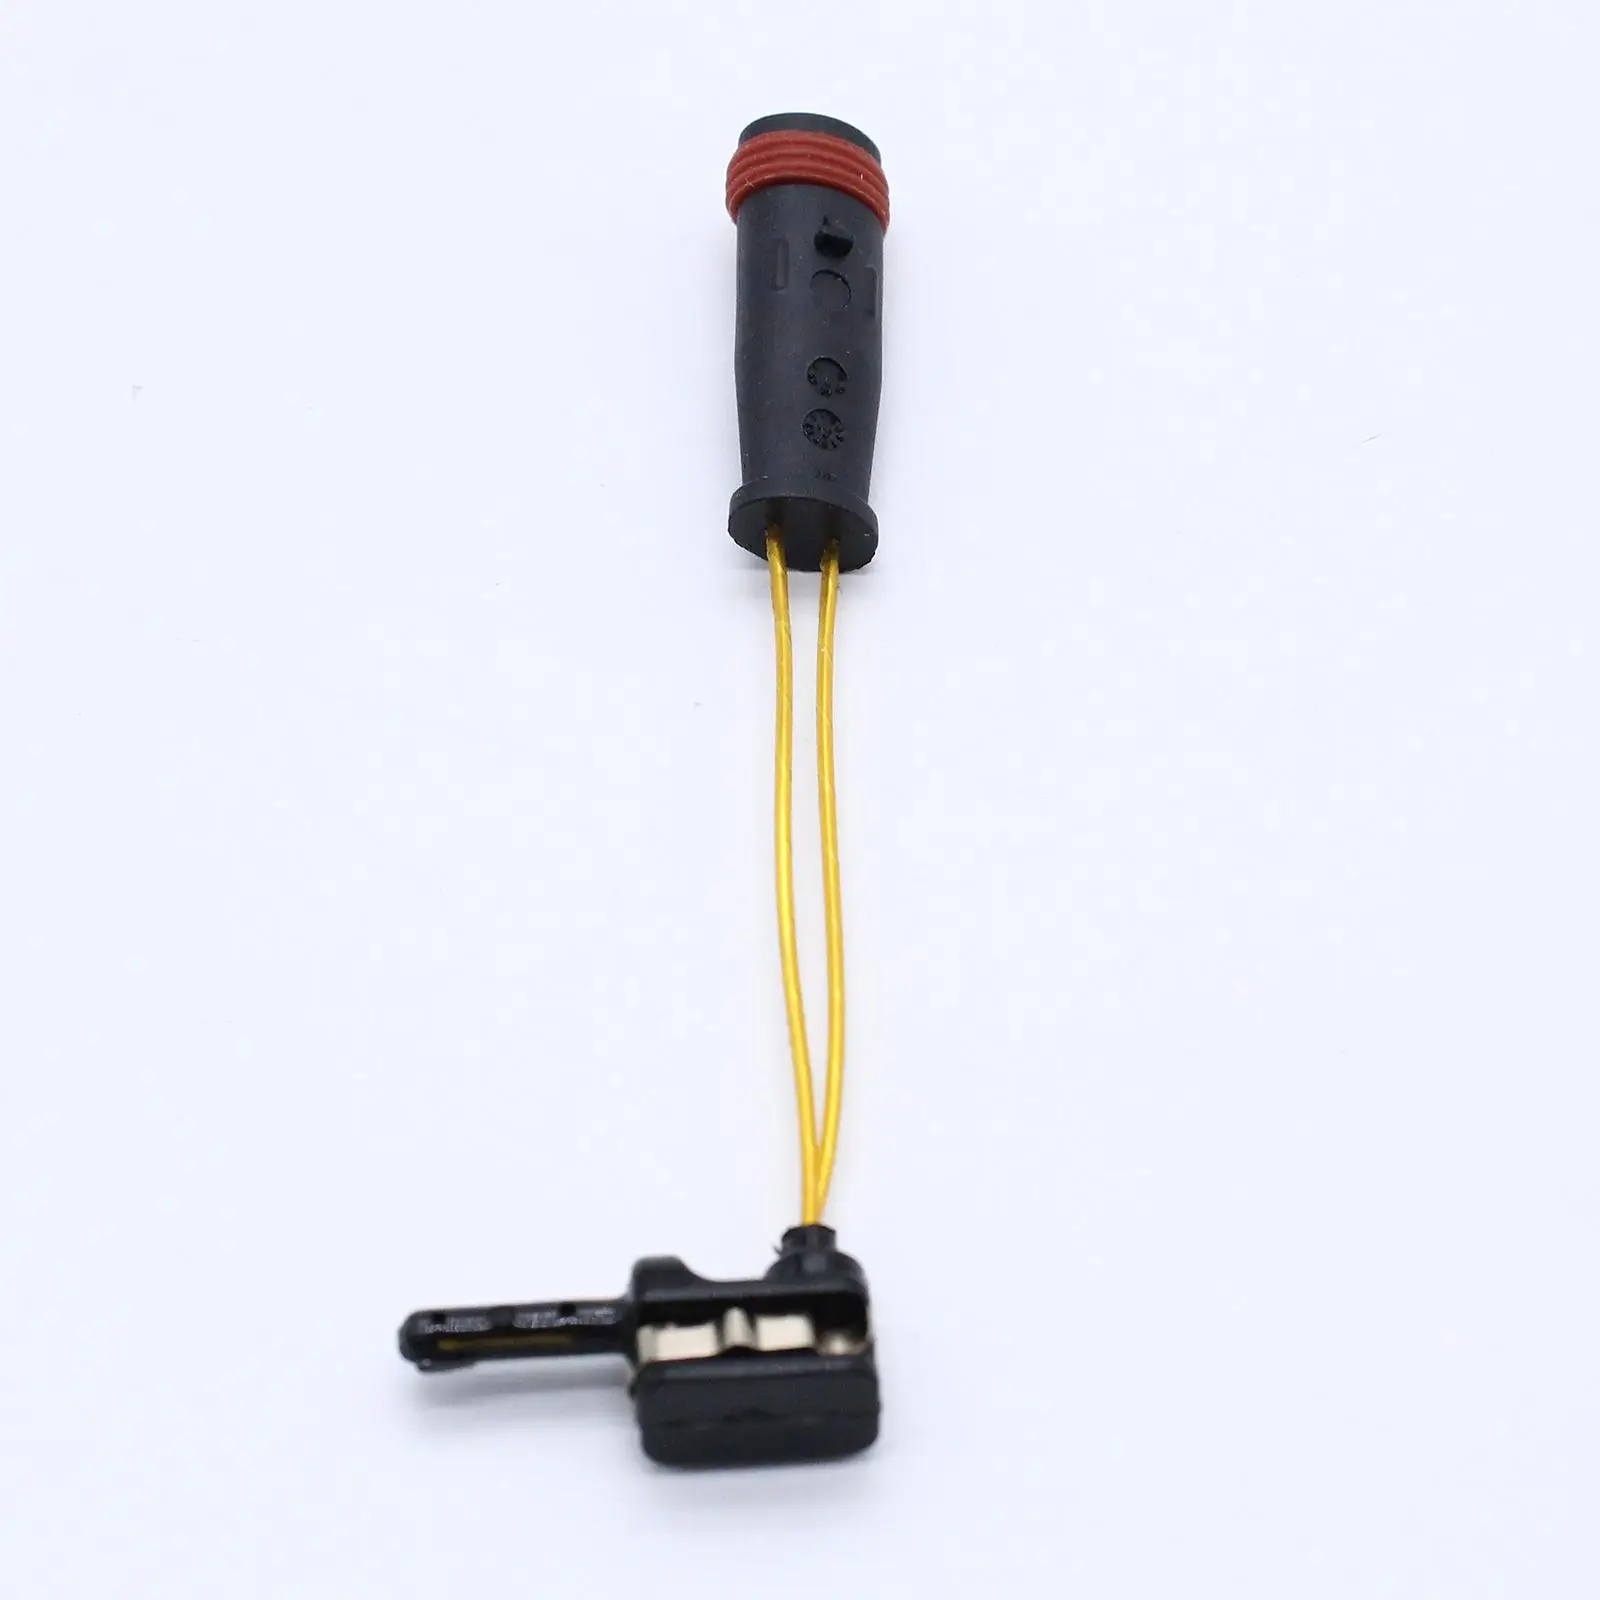 Car 2115401717 Brake Pad Wear Sensor Front Rear Fit for W203 W204 W211 CLK  High Performance Premium Professional Replaces